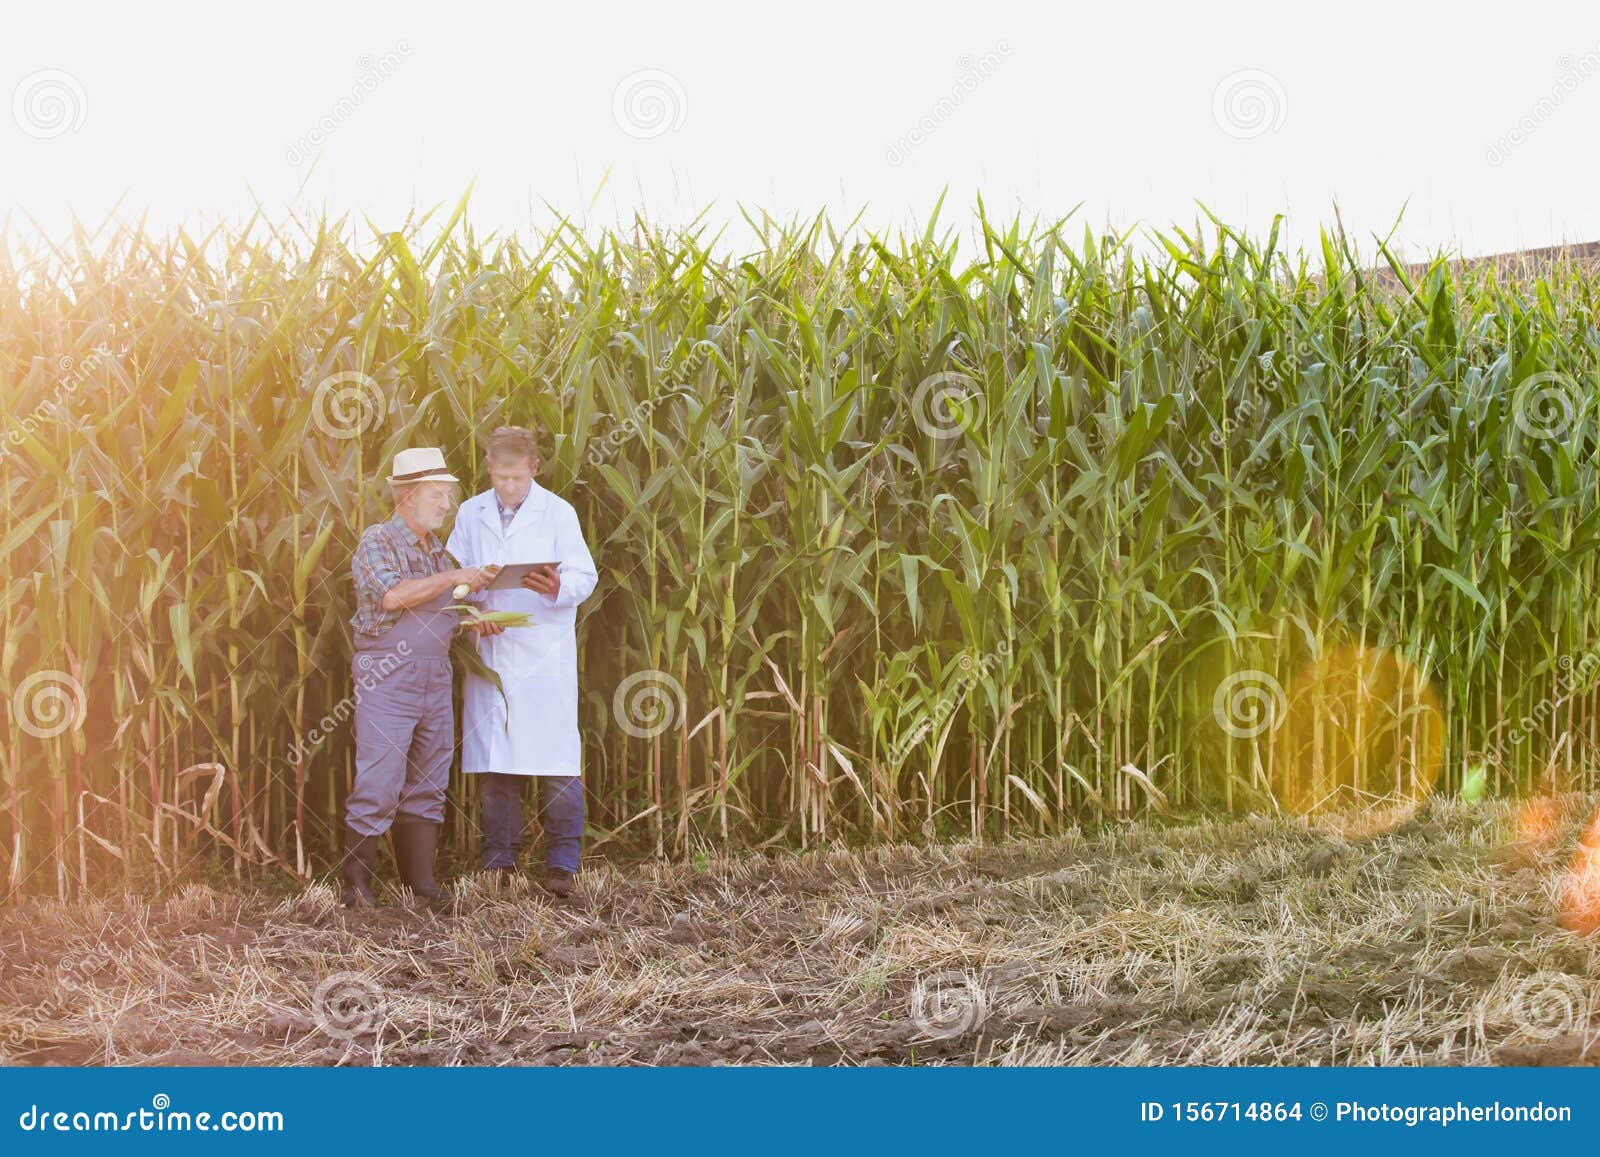 senior farmer standing whilst crop scientist examining corn and using digital tablet against corn plants growing in field with yel